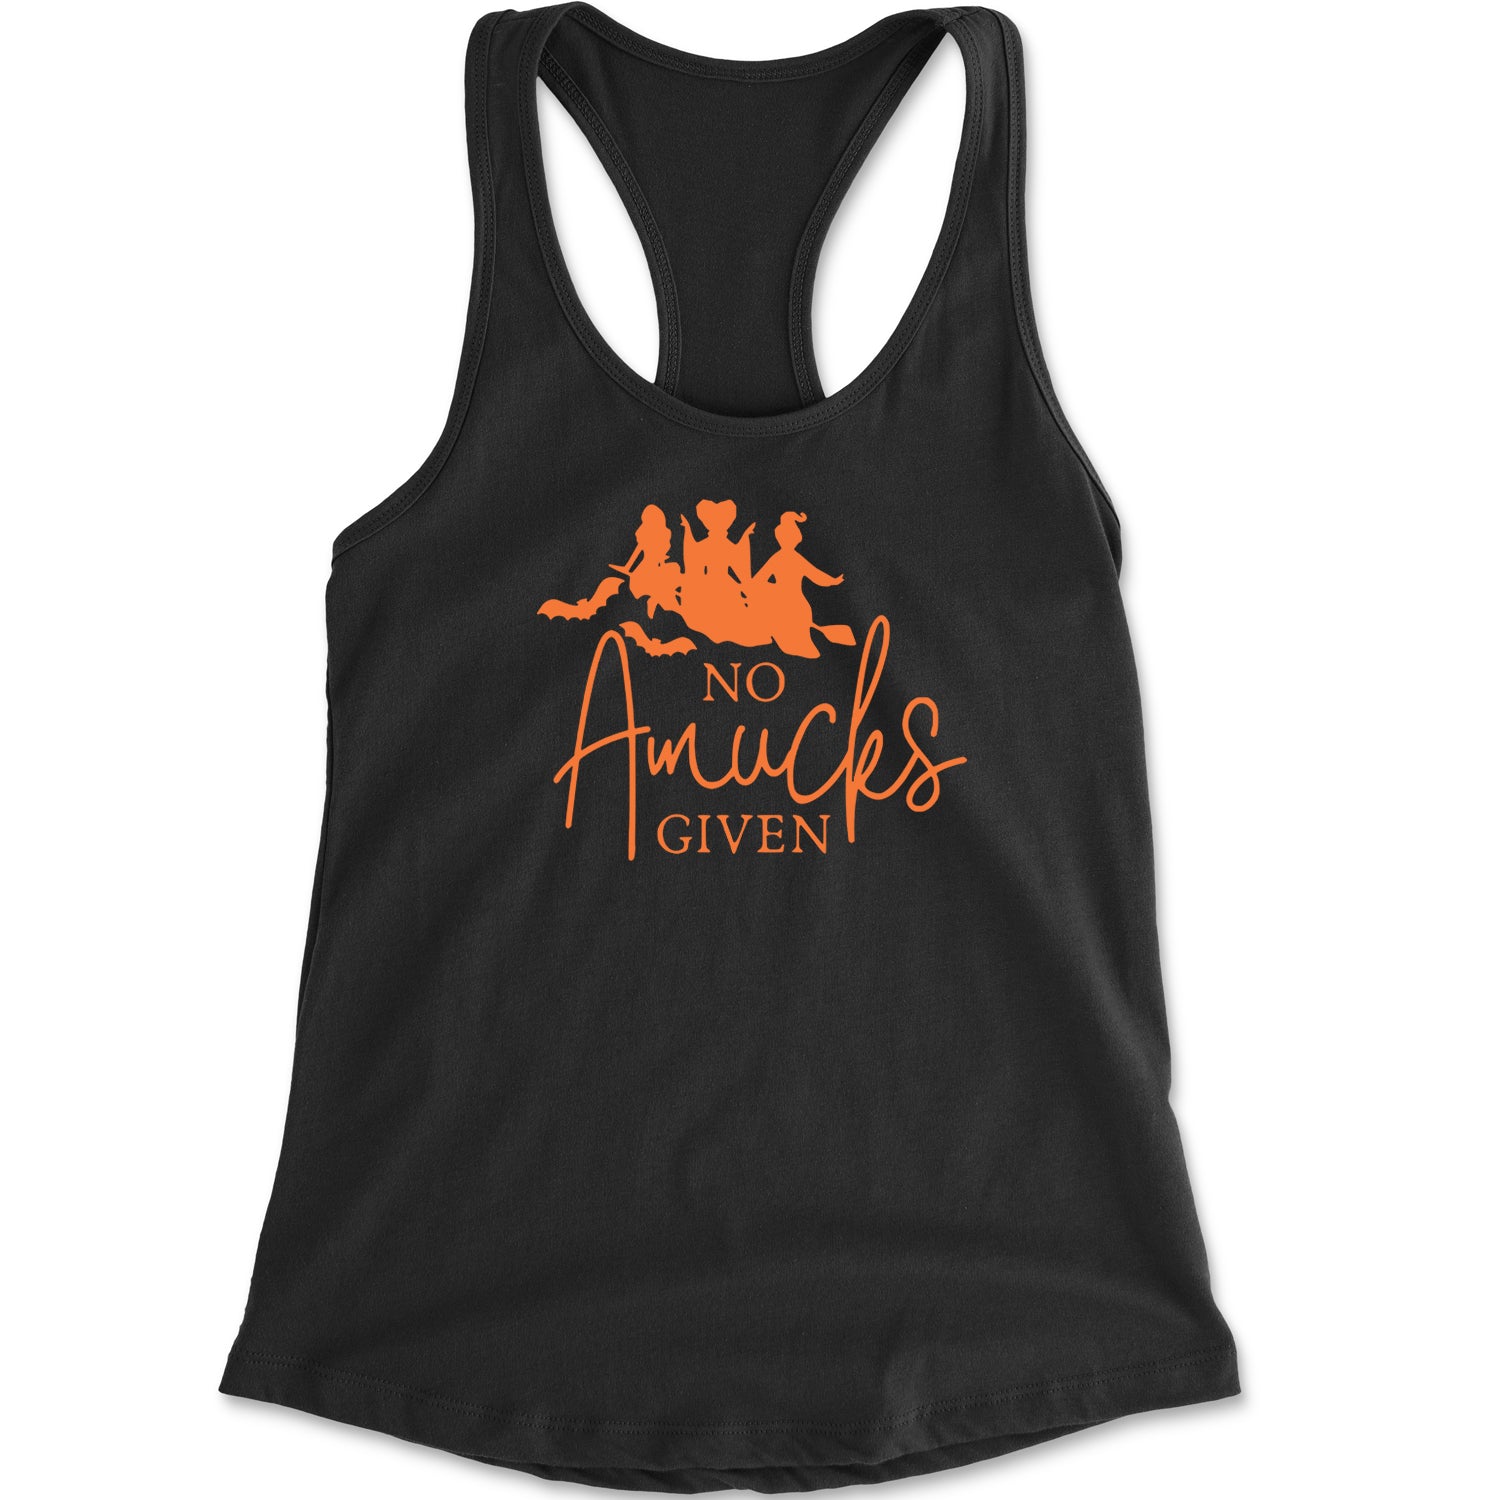 No Amucks Given Hocus Pocus Racerback Tank Top for Women descendants, enchanted, eve, hallows, hocus, or, pocus, sanderson, sisters, treat, trick, witches by Expression Tees